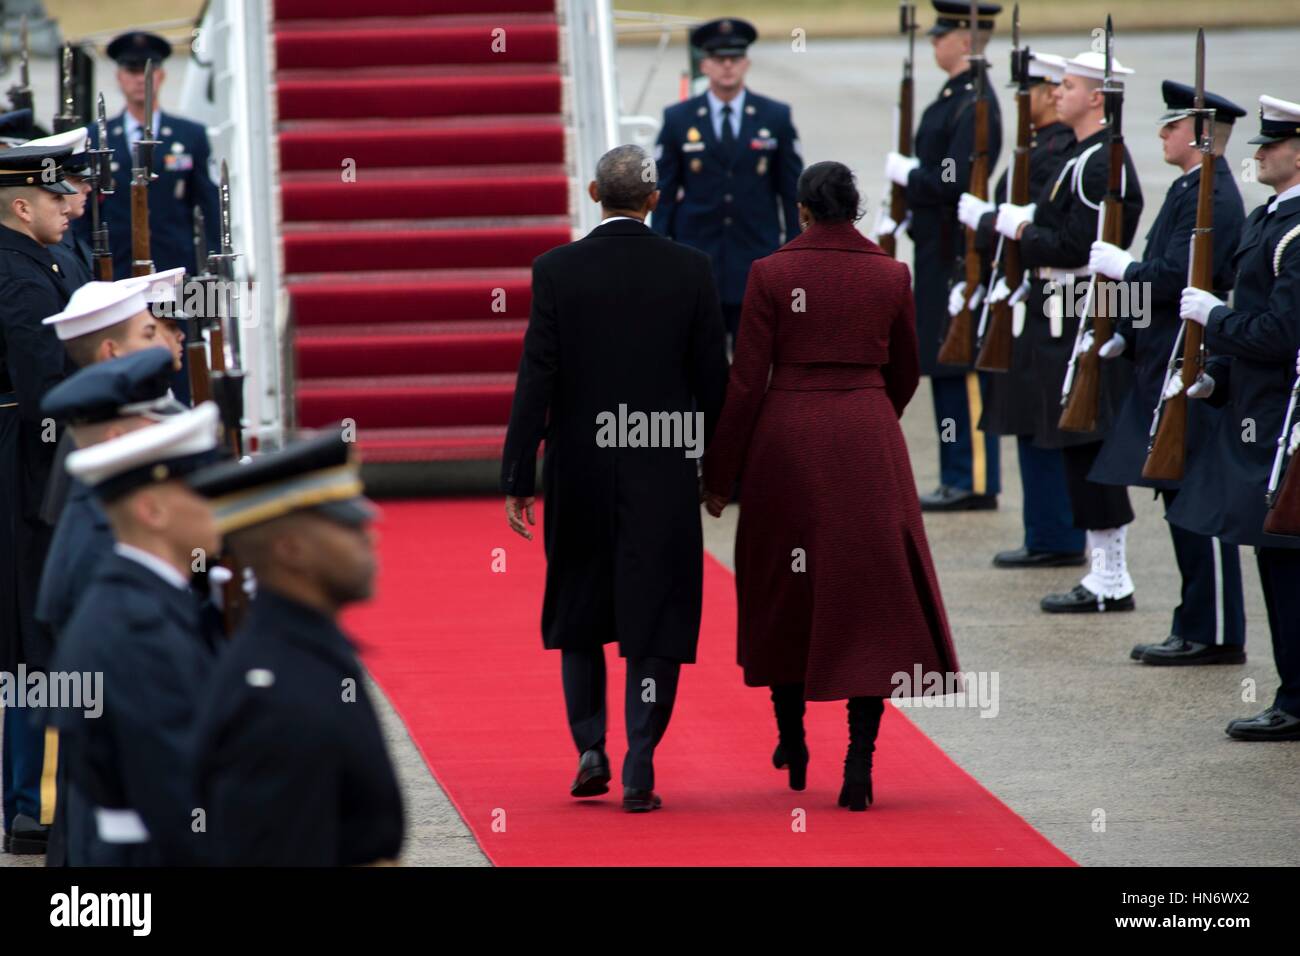 Former U.S. President Barack Obama and former First Lady Michelle Obama depart Joint Base Andrews after his farewell address January 20, 2017 in Maryland.     (photo by Philip Bryant /US Air Force via Planetpix) Stock Photo